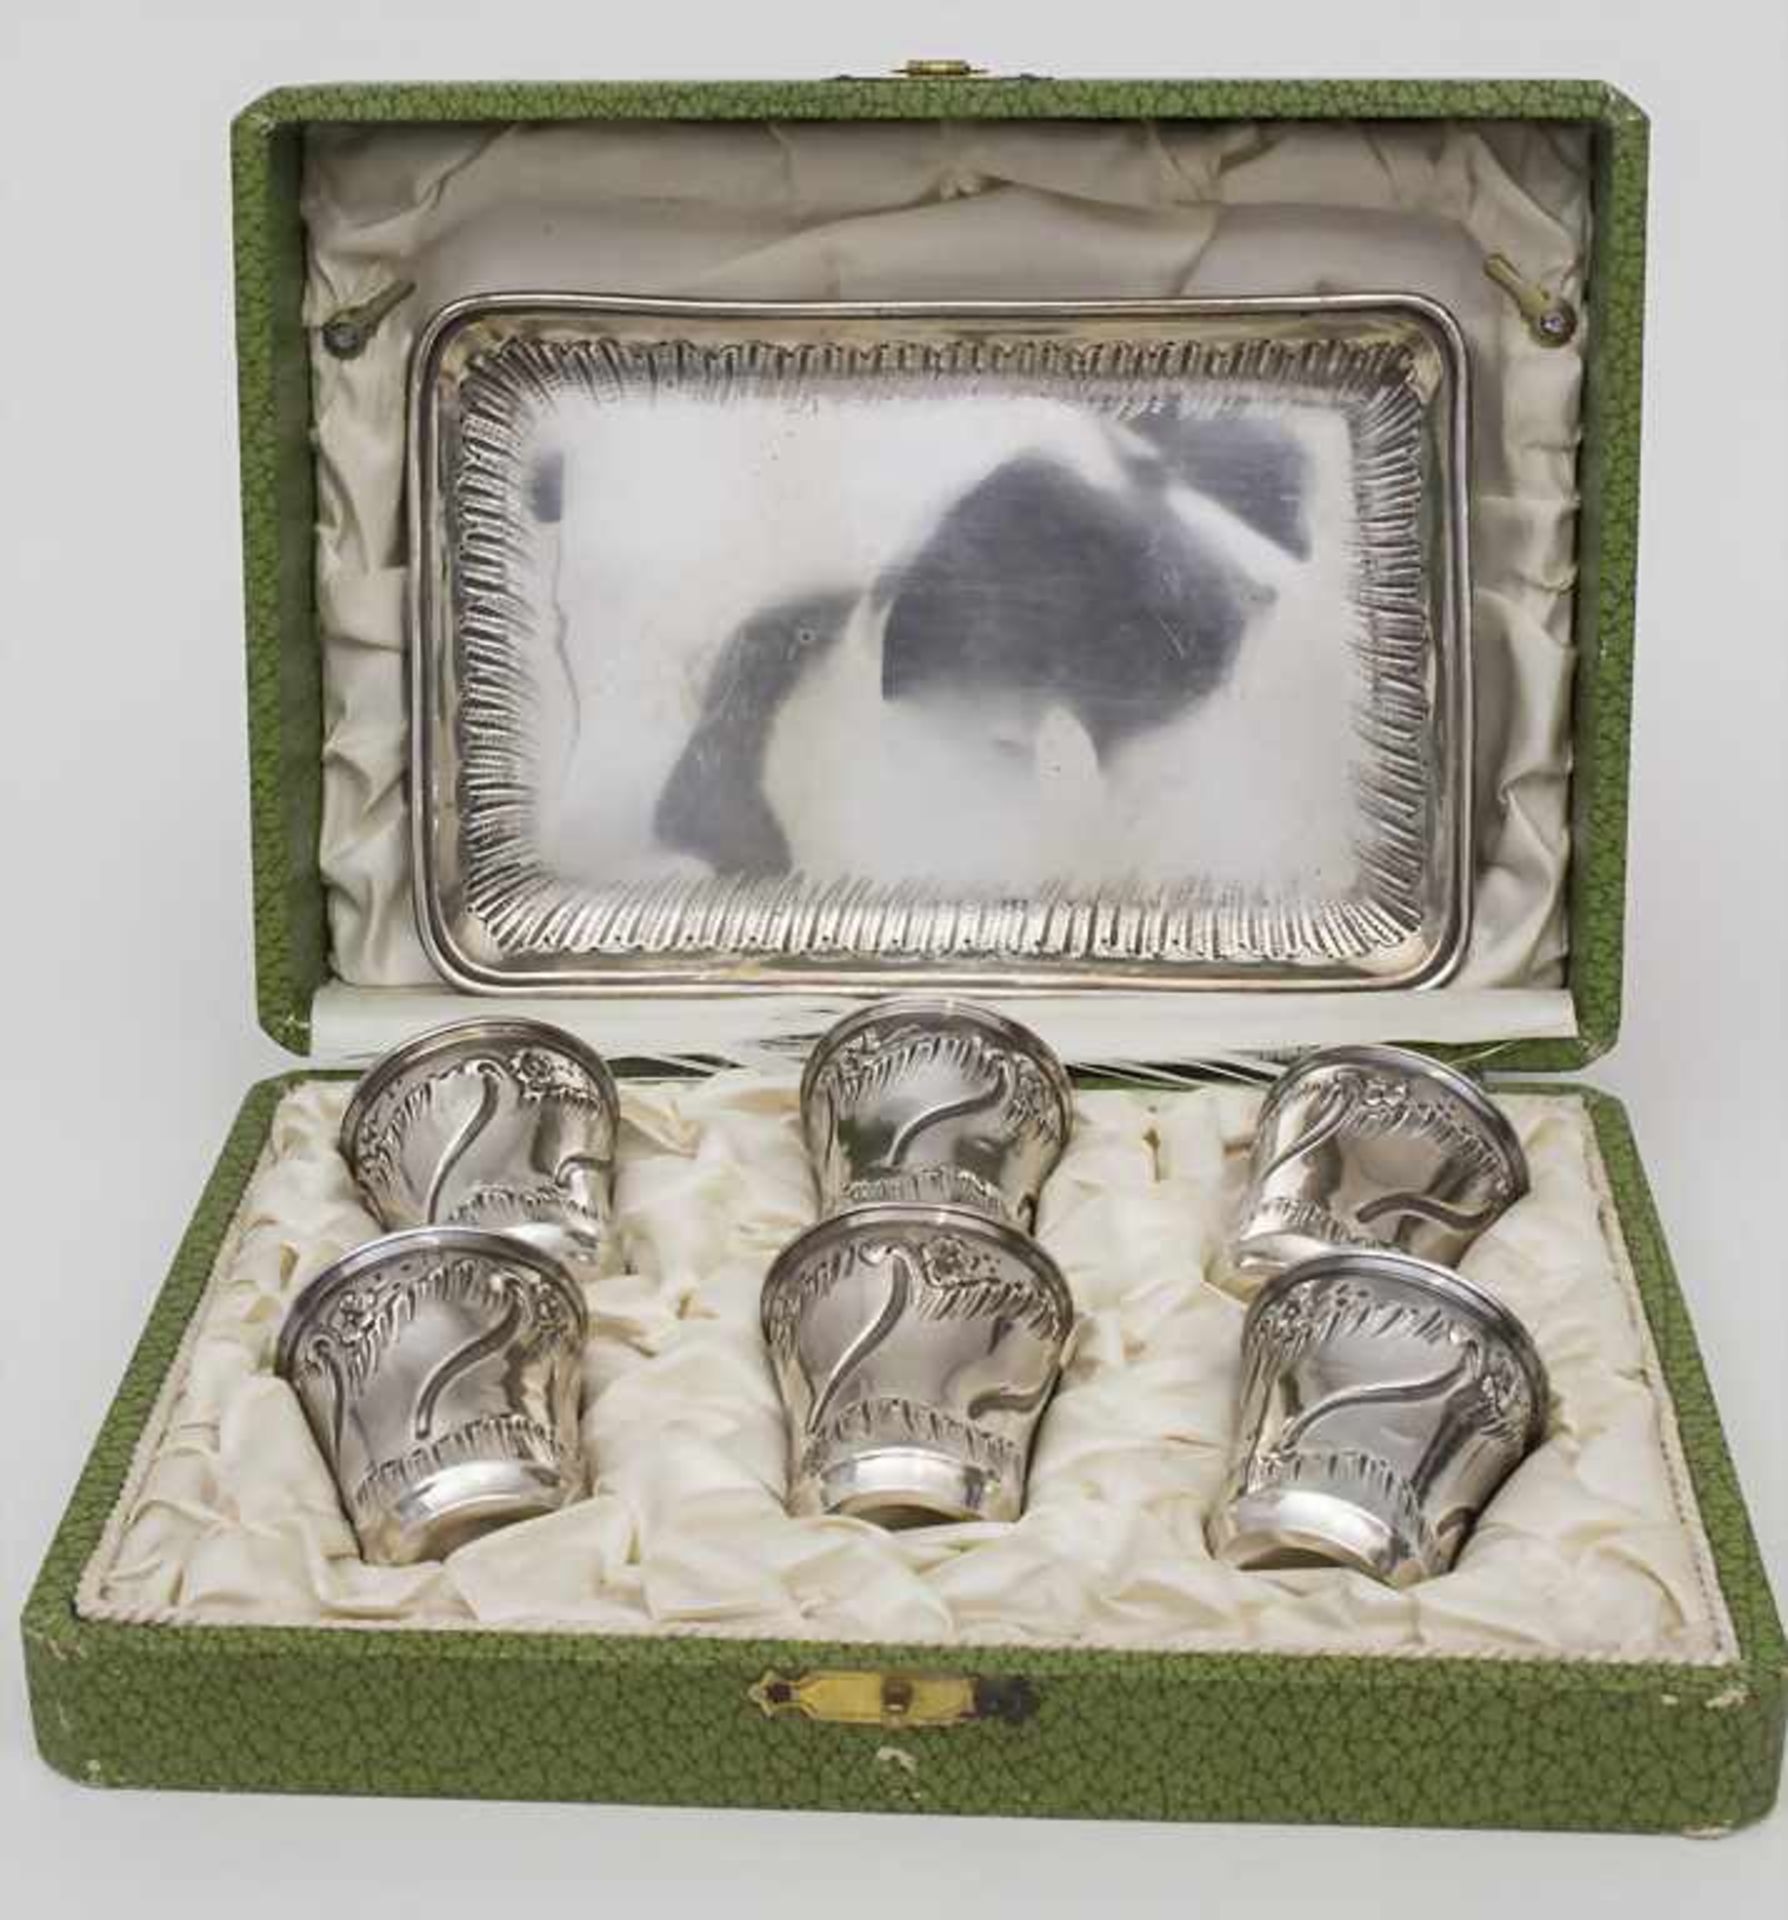 6 Schnapsbecher und Tablett in Schatulle / 6 silver cups and tray with case, Henry Soufflot, - Image 4 of 19